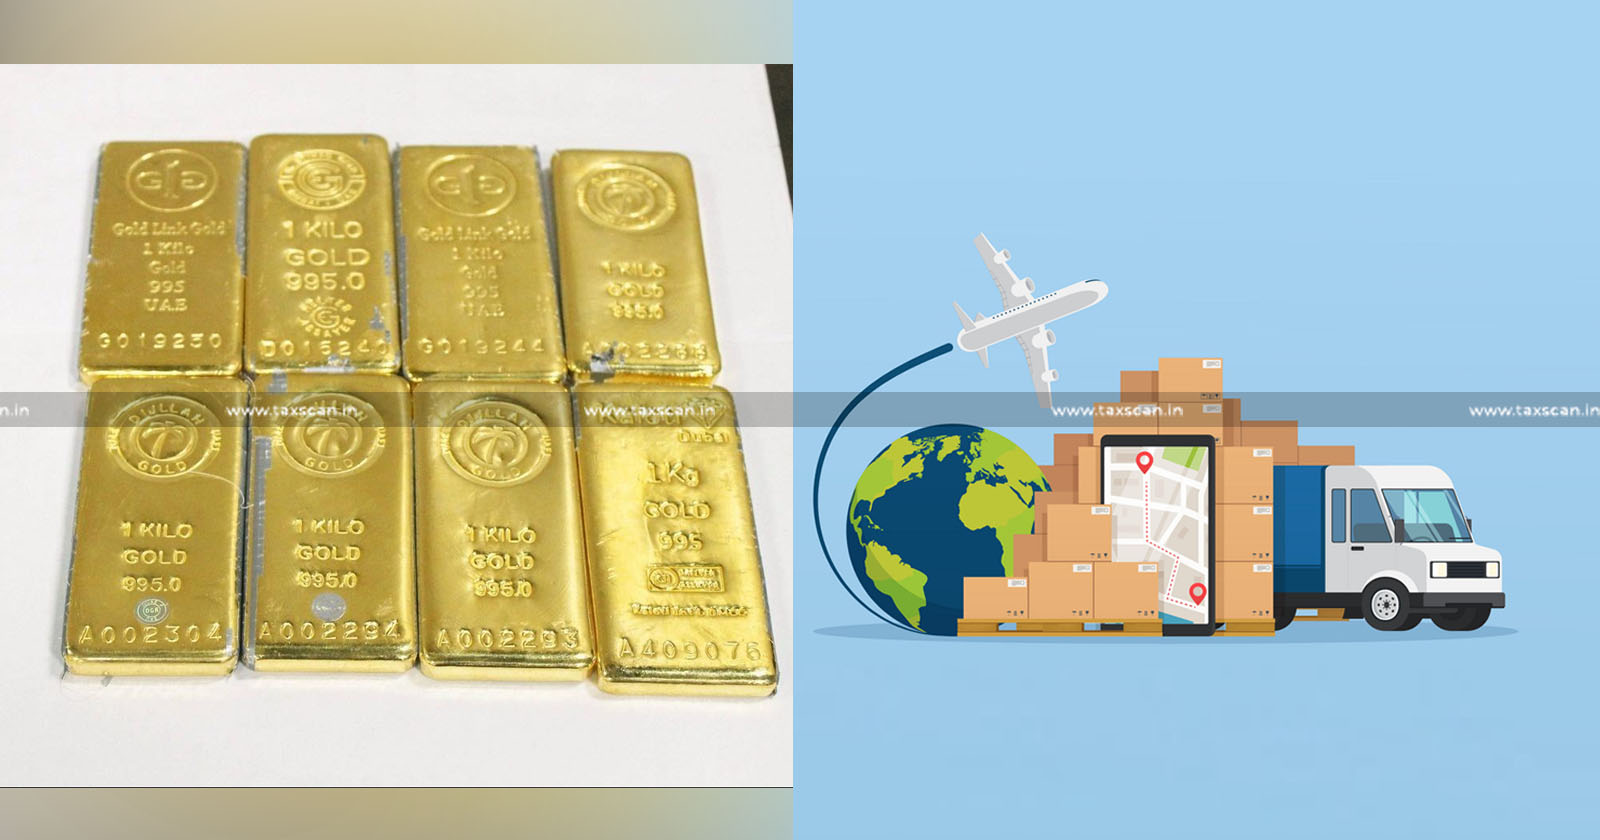 Role of Courier Service in Smuggling Gold - Role of Courier Service - Courier Service - Smuggling Gold - Smuggling - Gold - CESTAT - Authorized Courier - CESTAT - Taxscan